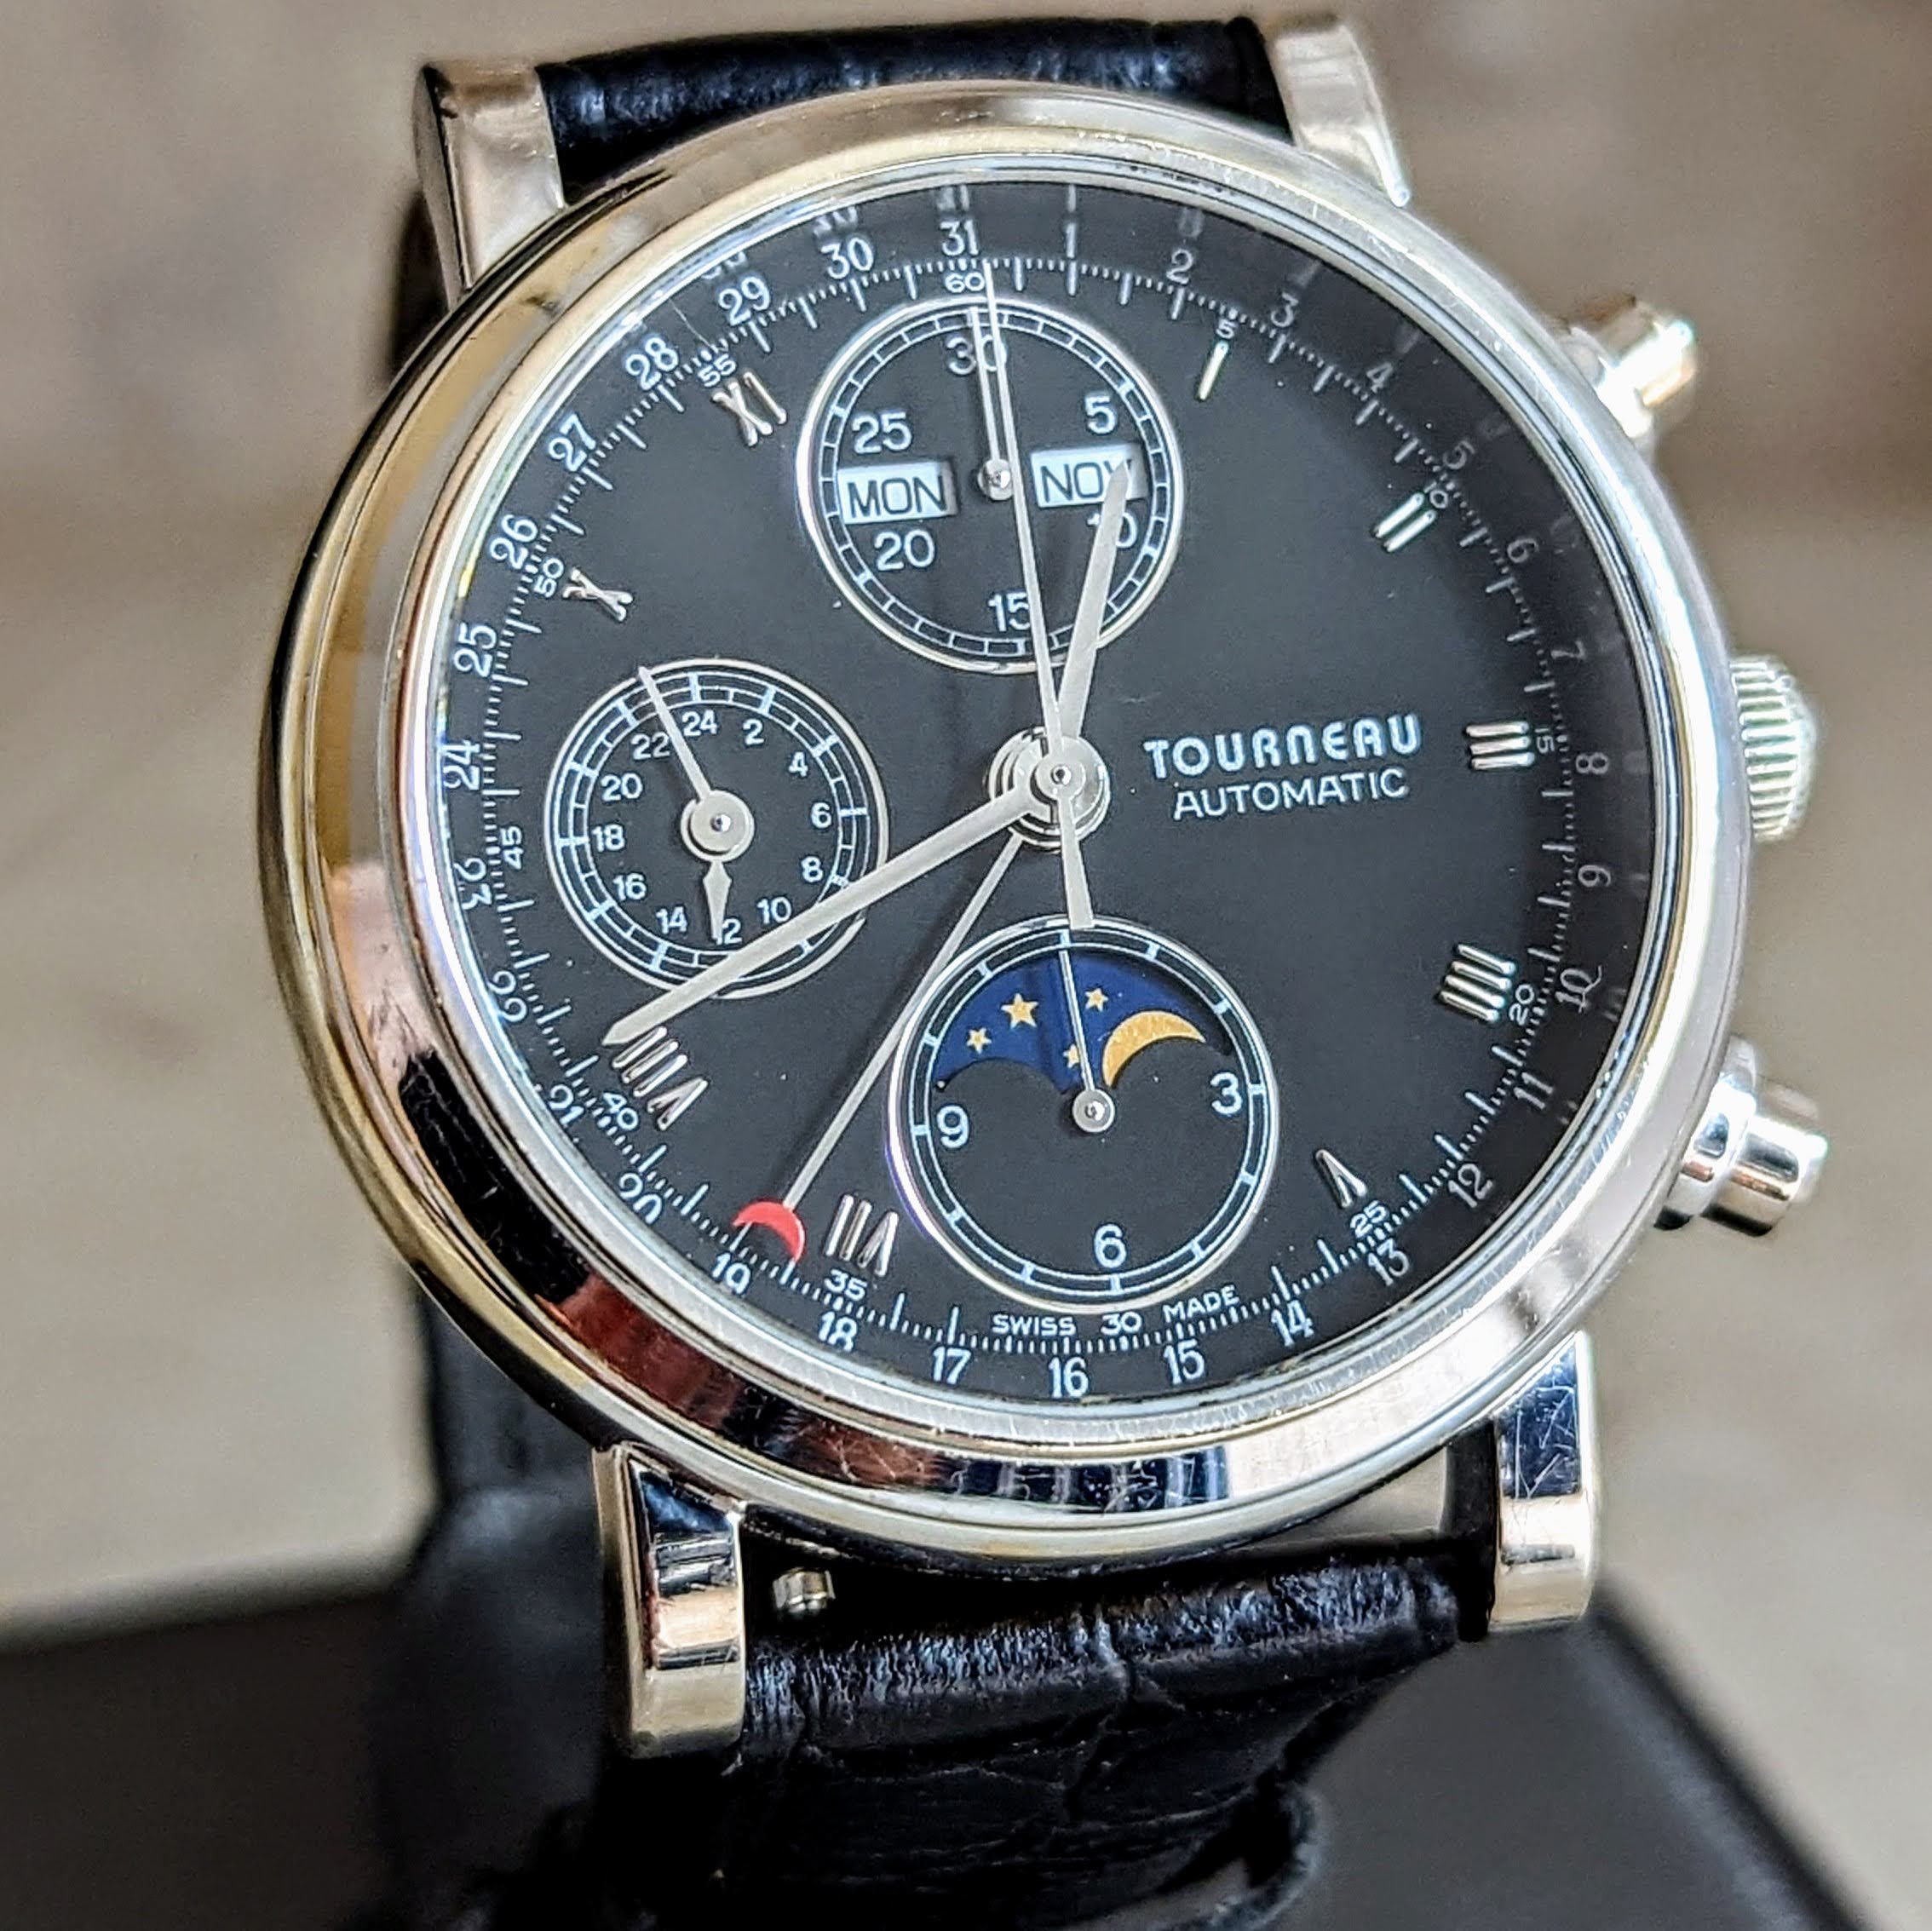 TOURNEAU Automatic Watch Day/Date Moonphase Chronograph 18K Gold Wristwatch